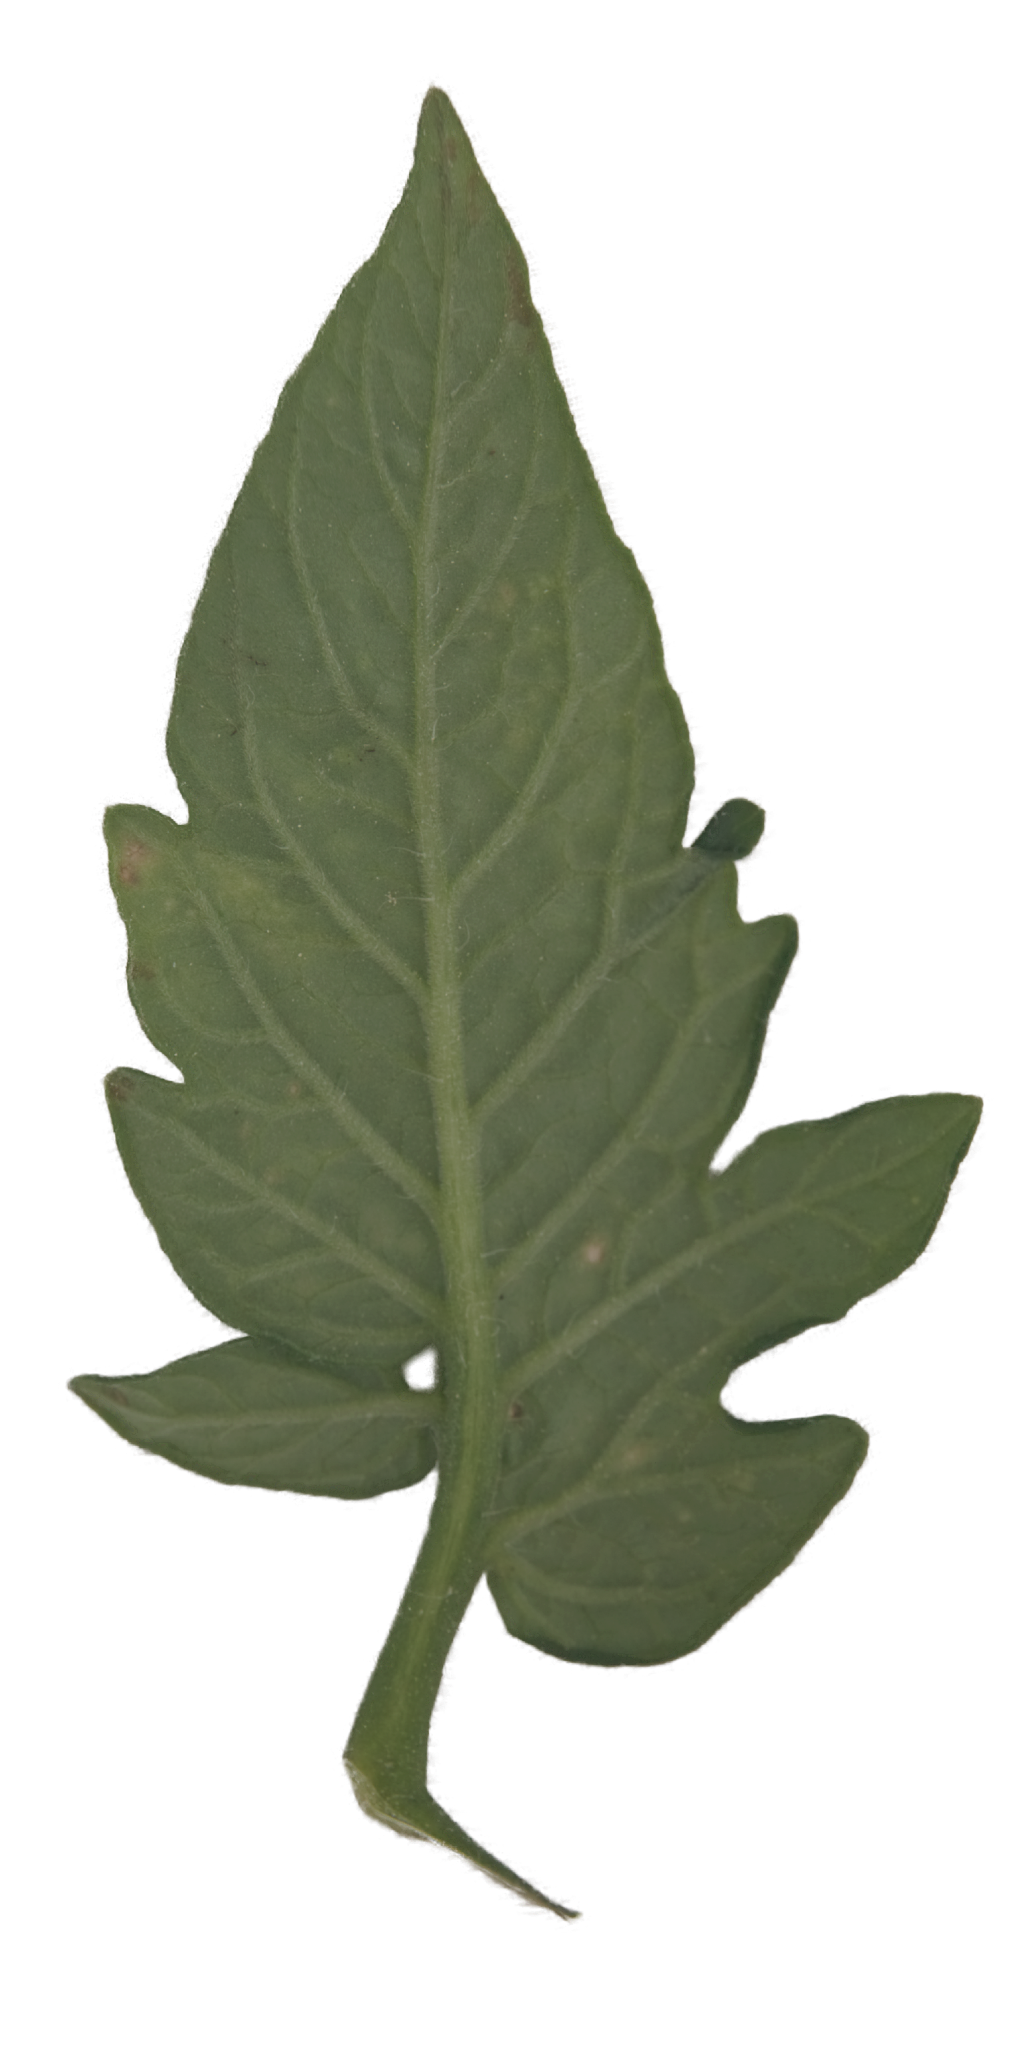 Tomato Leaf 01 | Free PBR texture from cgbookcase.com